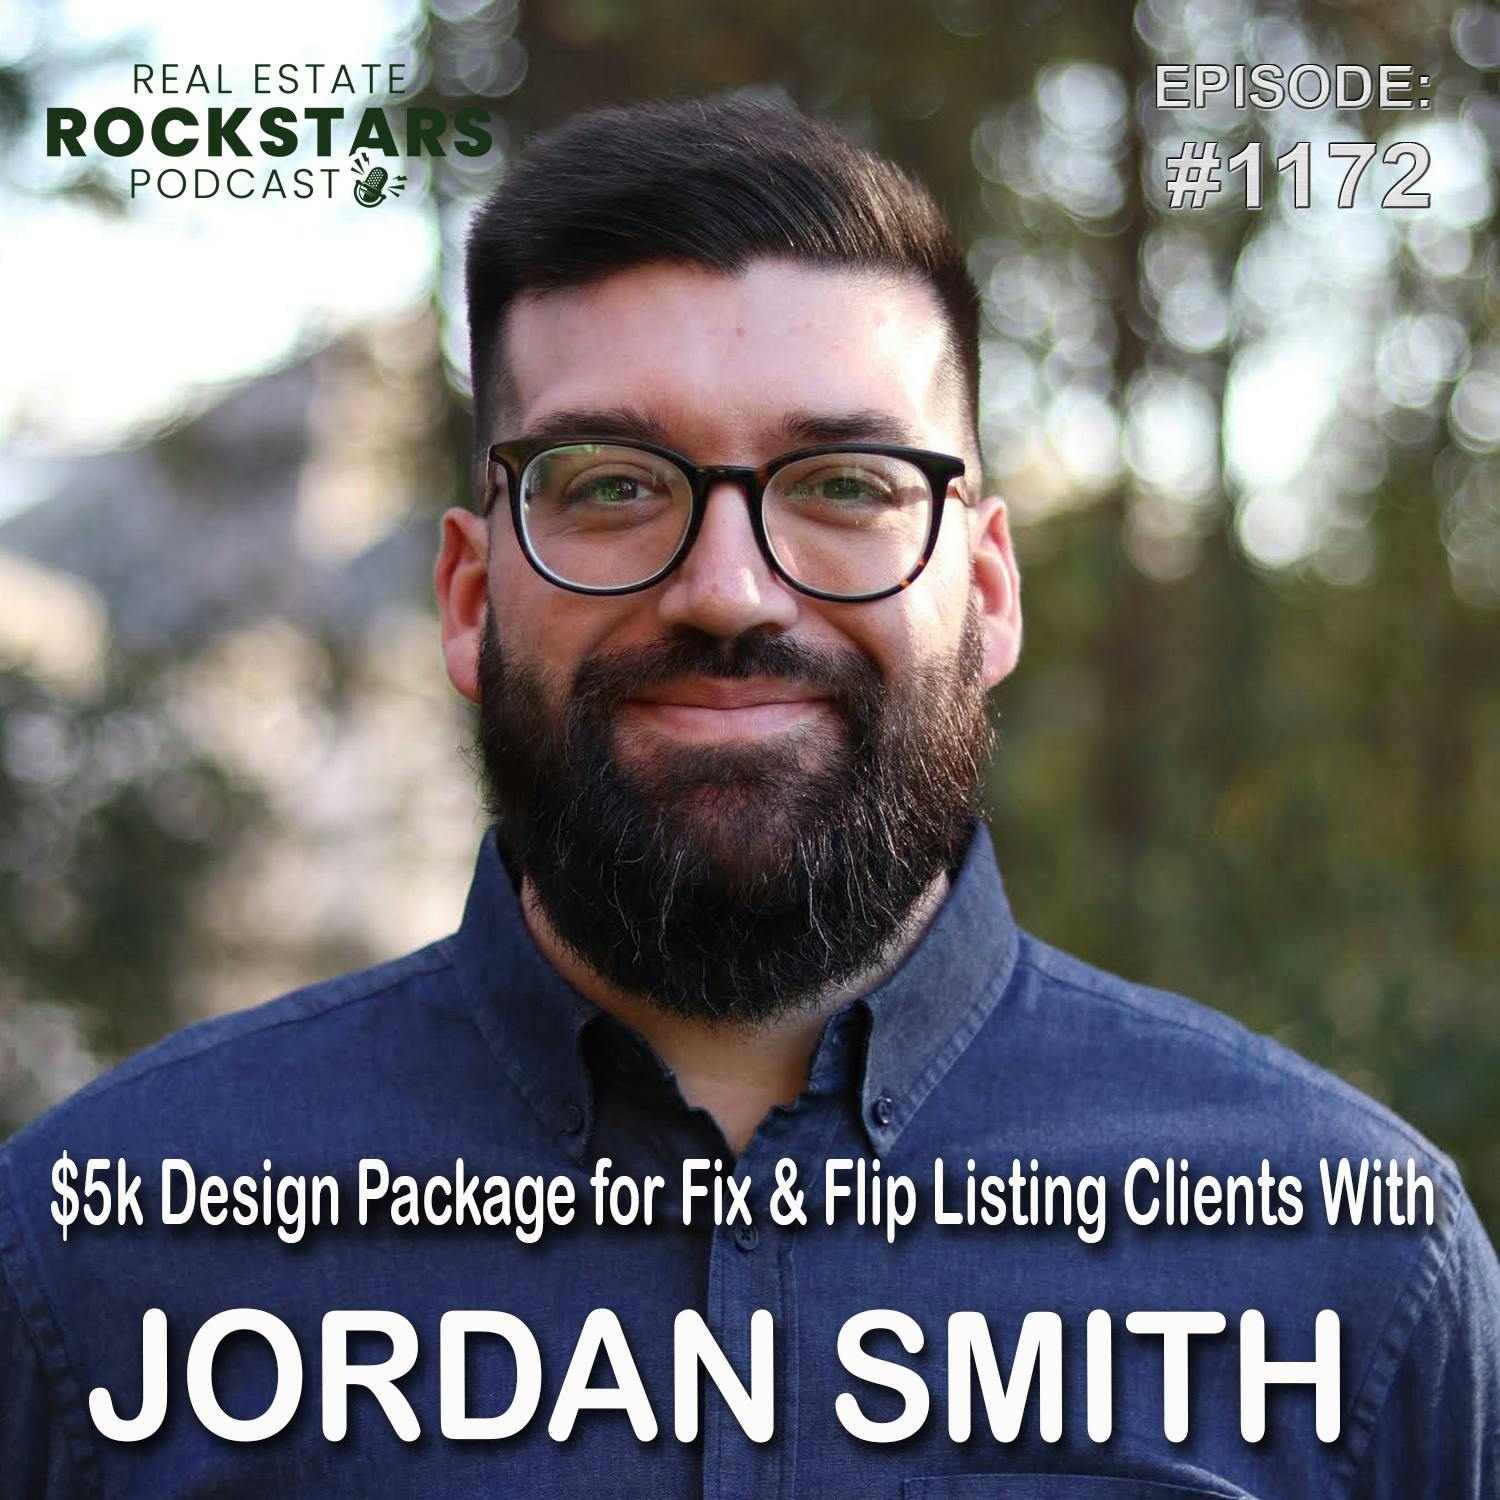 1172: $5k Design Package for Fix & Flip Listing Clients With Jordan Smith